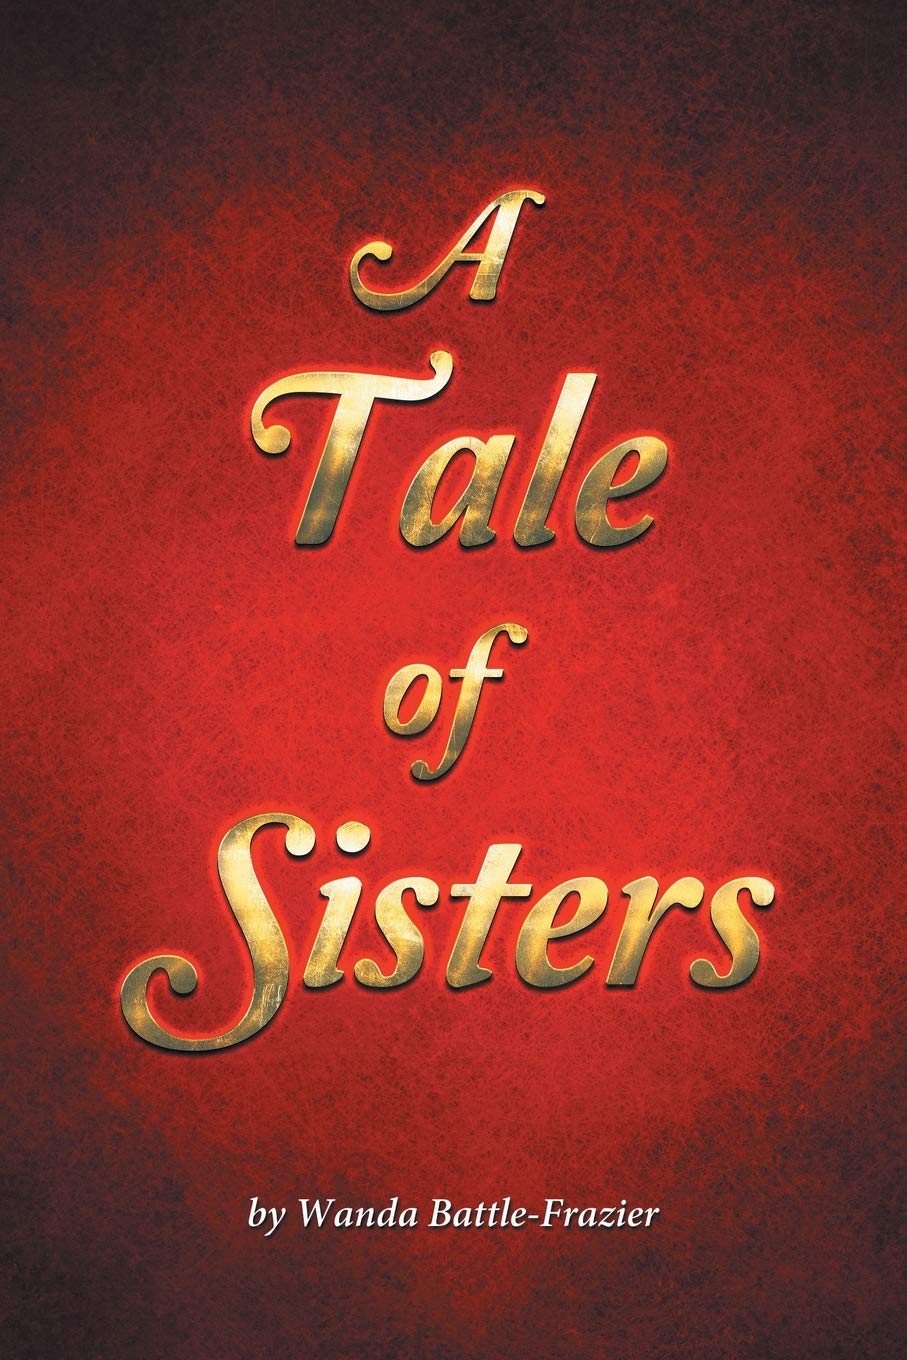 Wanda Battle-Frazier, Author’s Tranquility Press Chronicles The Estrangement Story of A Triplet Set in A Tale of Sisters